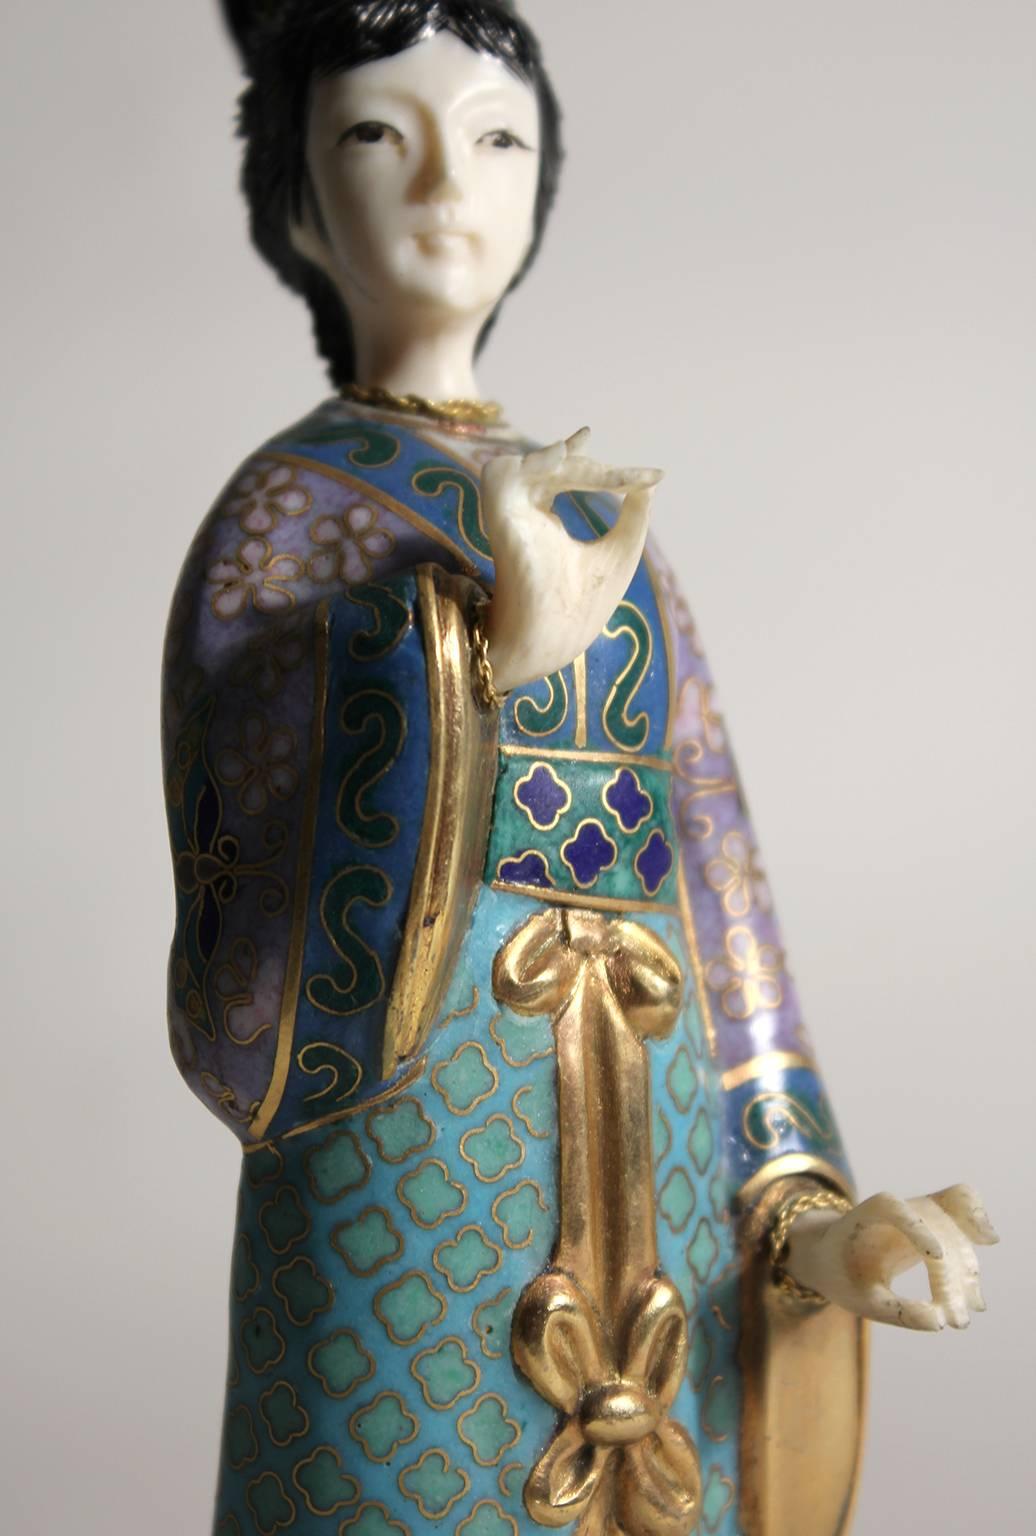 Antique Chinese Cloisonne Enameled Carved Guanyin Quan Yin Sculpture Figurine 1